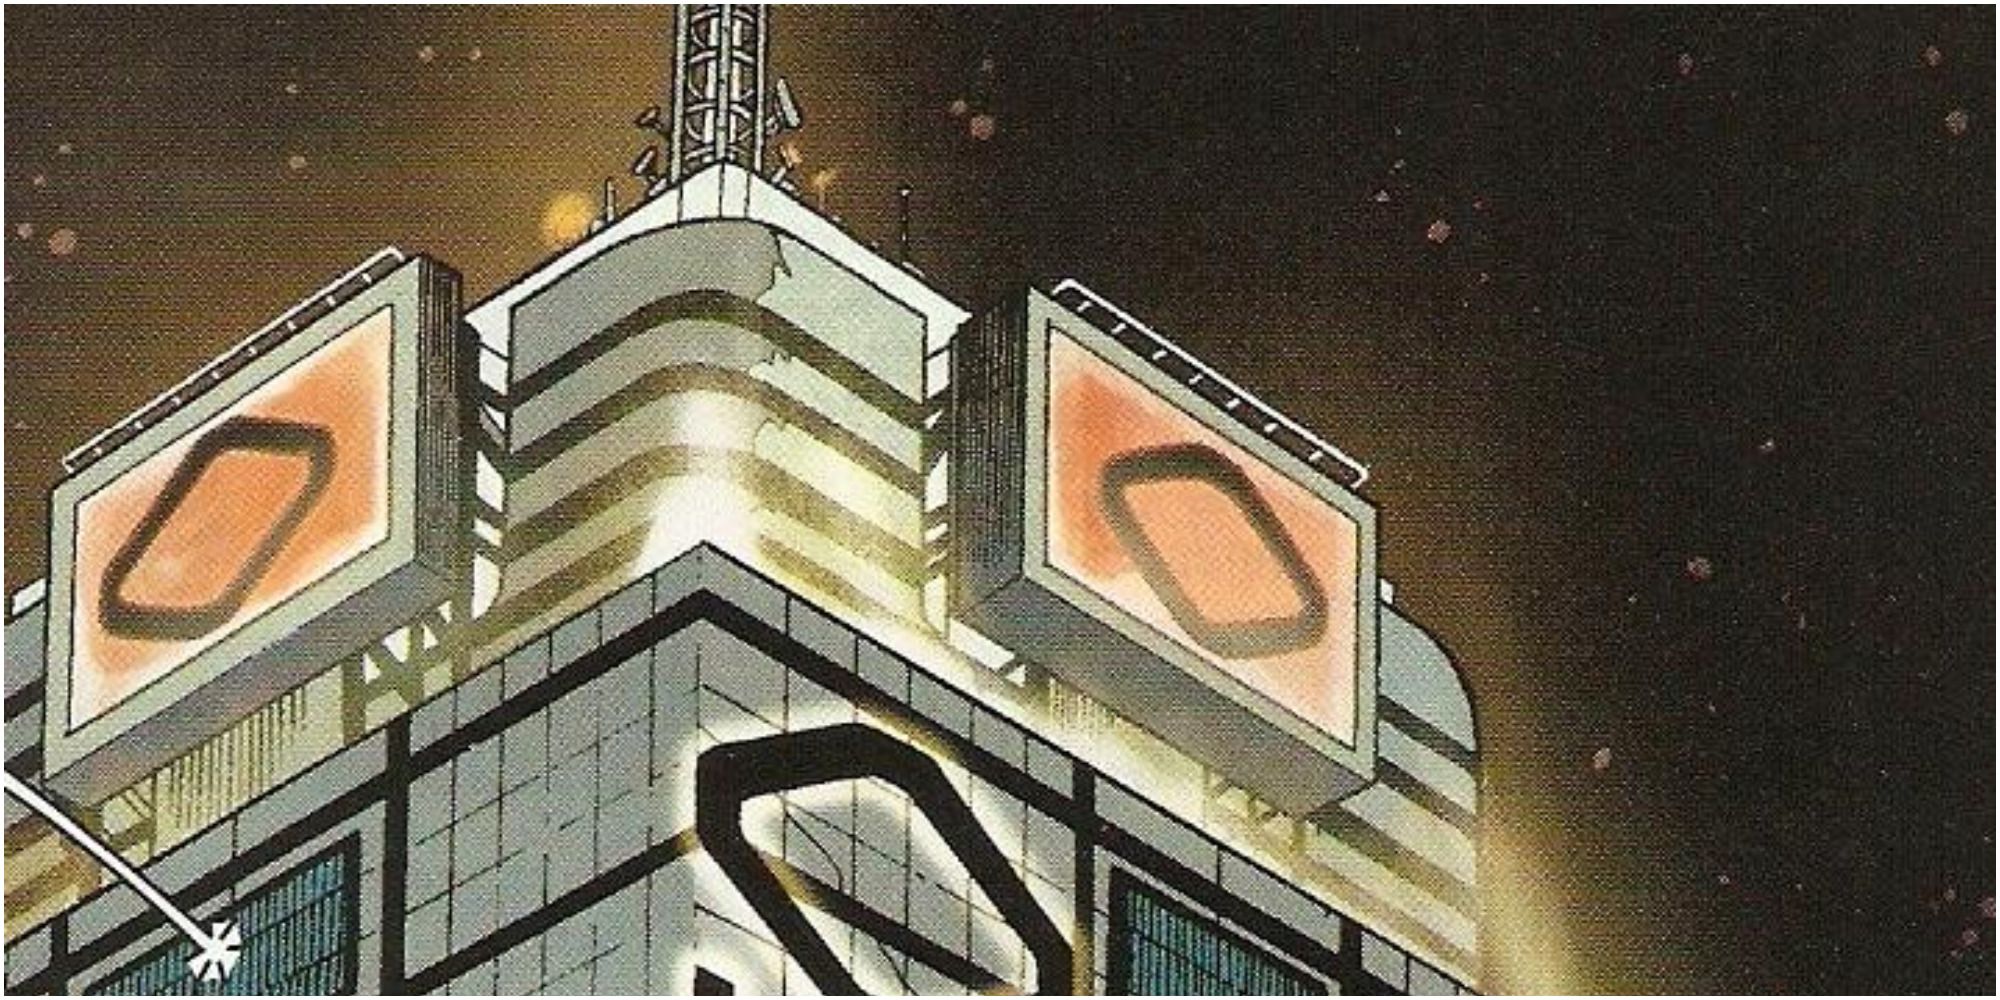 Marvel Comics' OsCorp Tower from the street